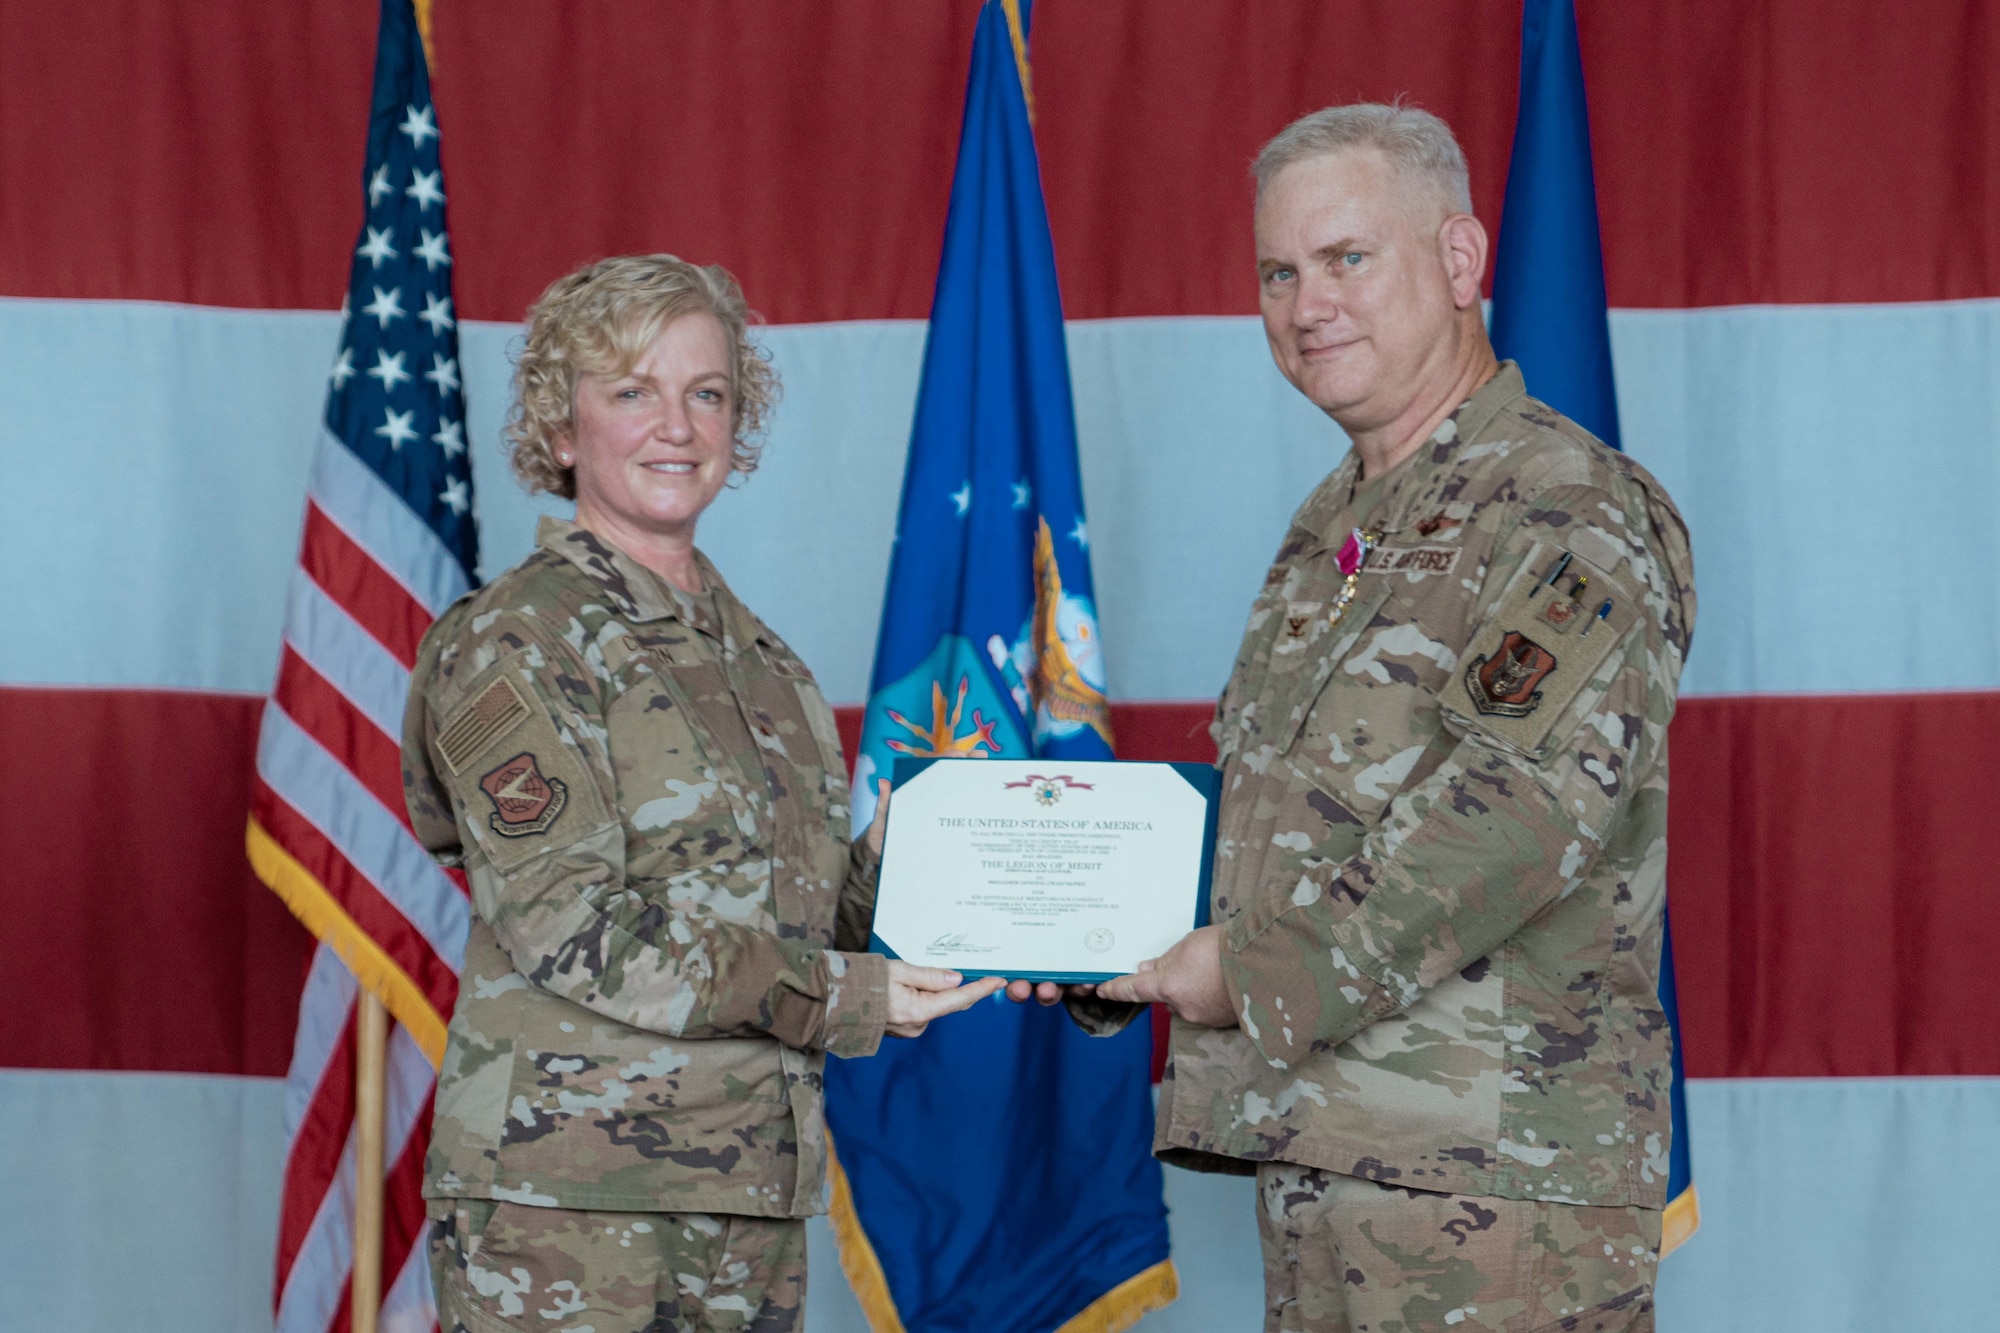 Brig. Gen. Melissa A. Coburn, 22nd Air Force commander, and Col. Carl Magnusson, outgoing 94th Airlift Wing commander, pose for a photo with Magnusson's Legion of Merit award.